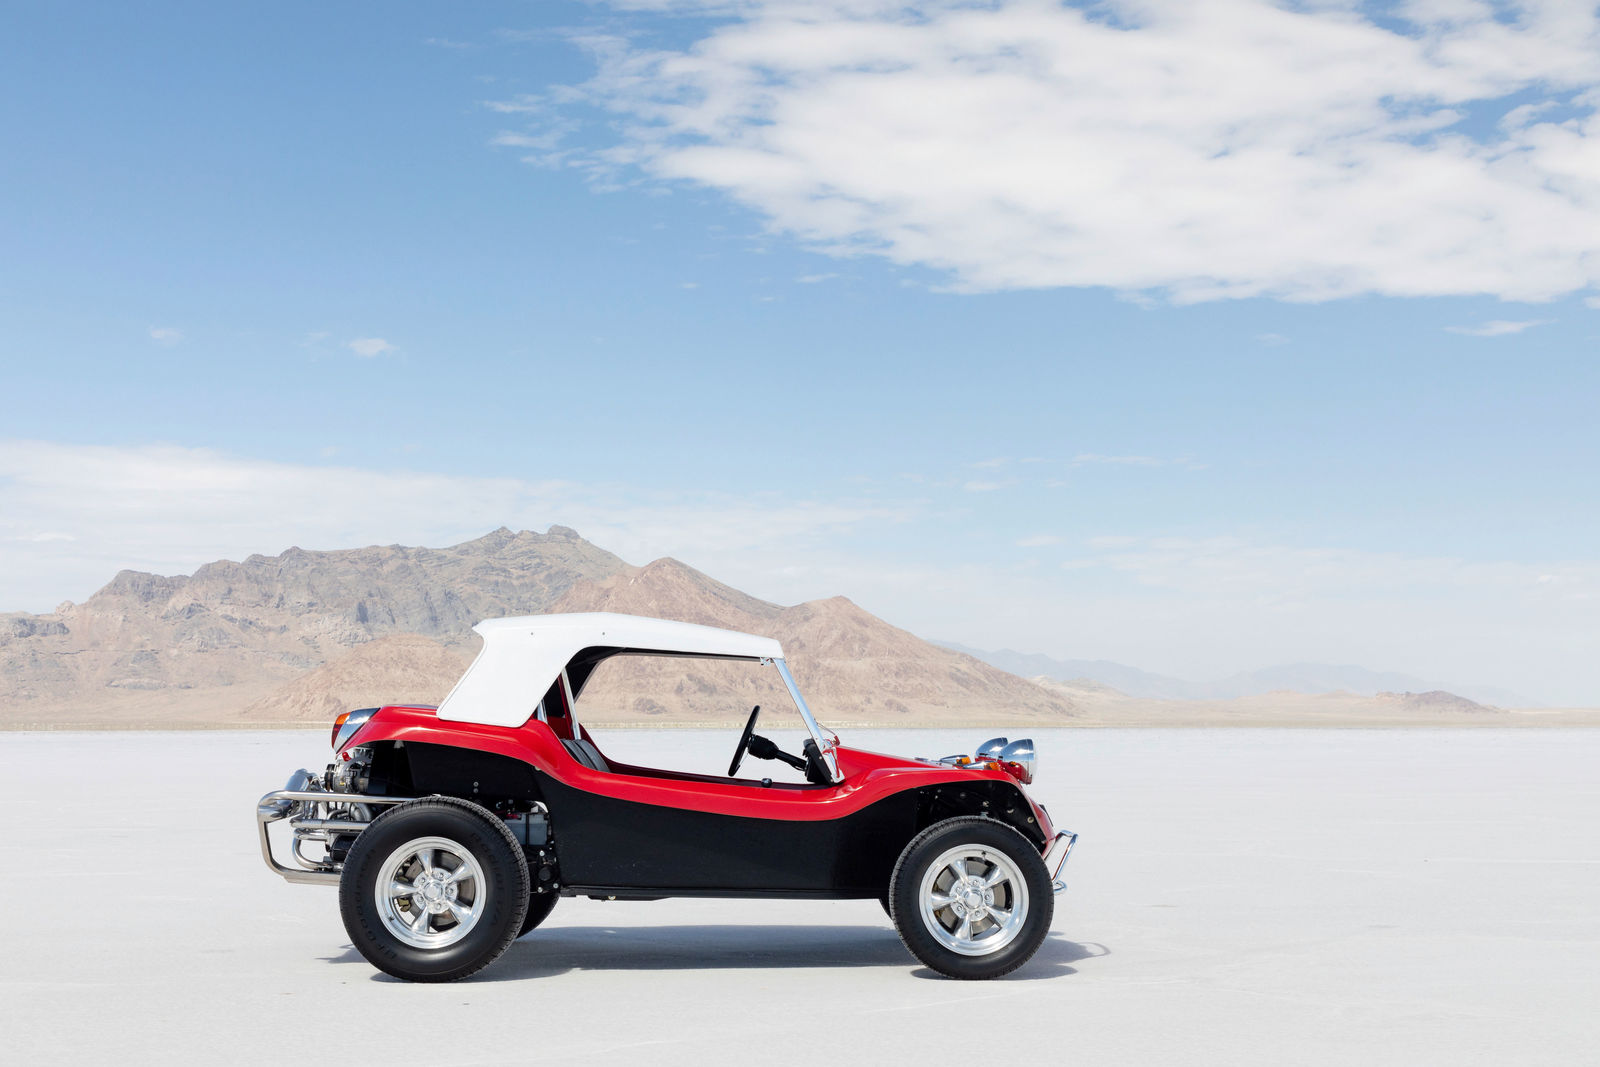 This beach buggy called Meyers Manx has been developed in the 1960s based on a Beetle chassis.